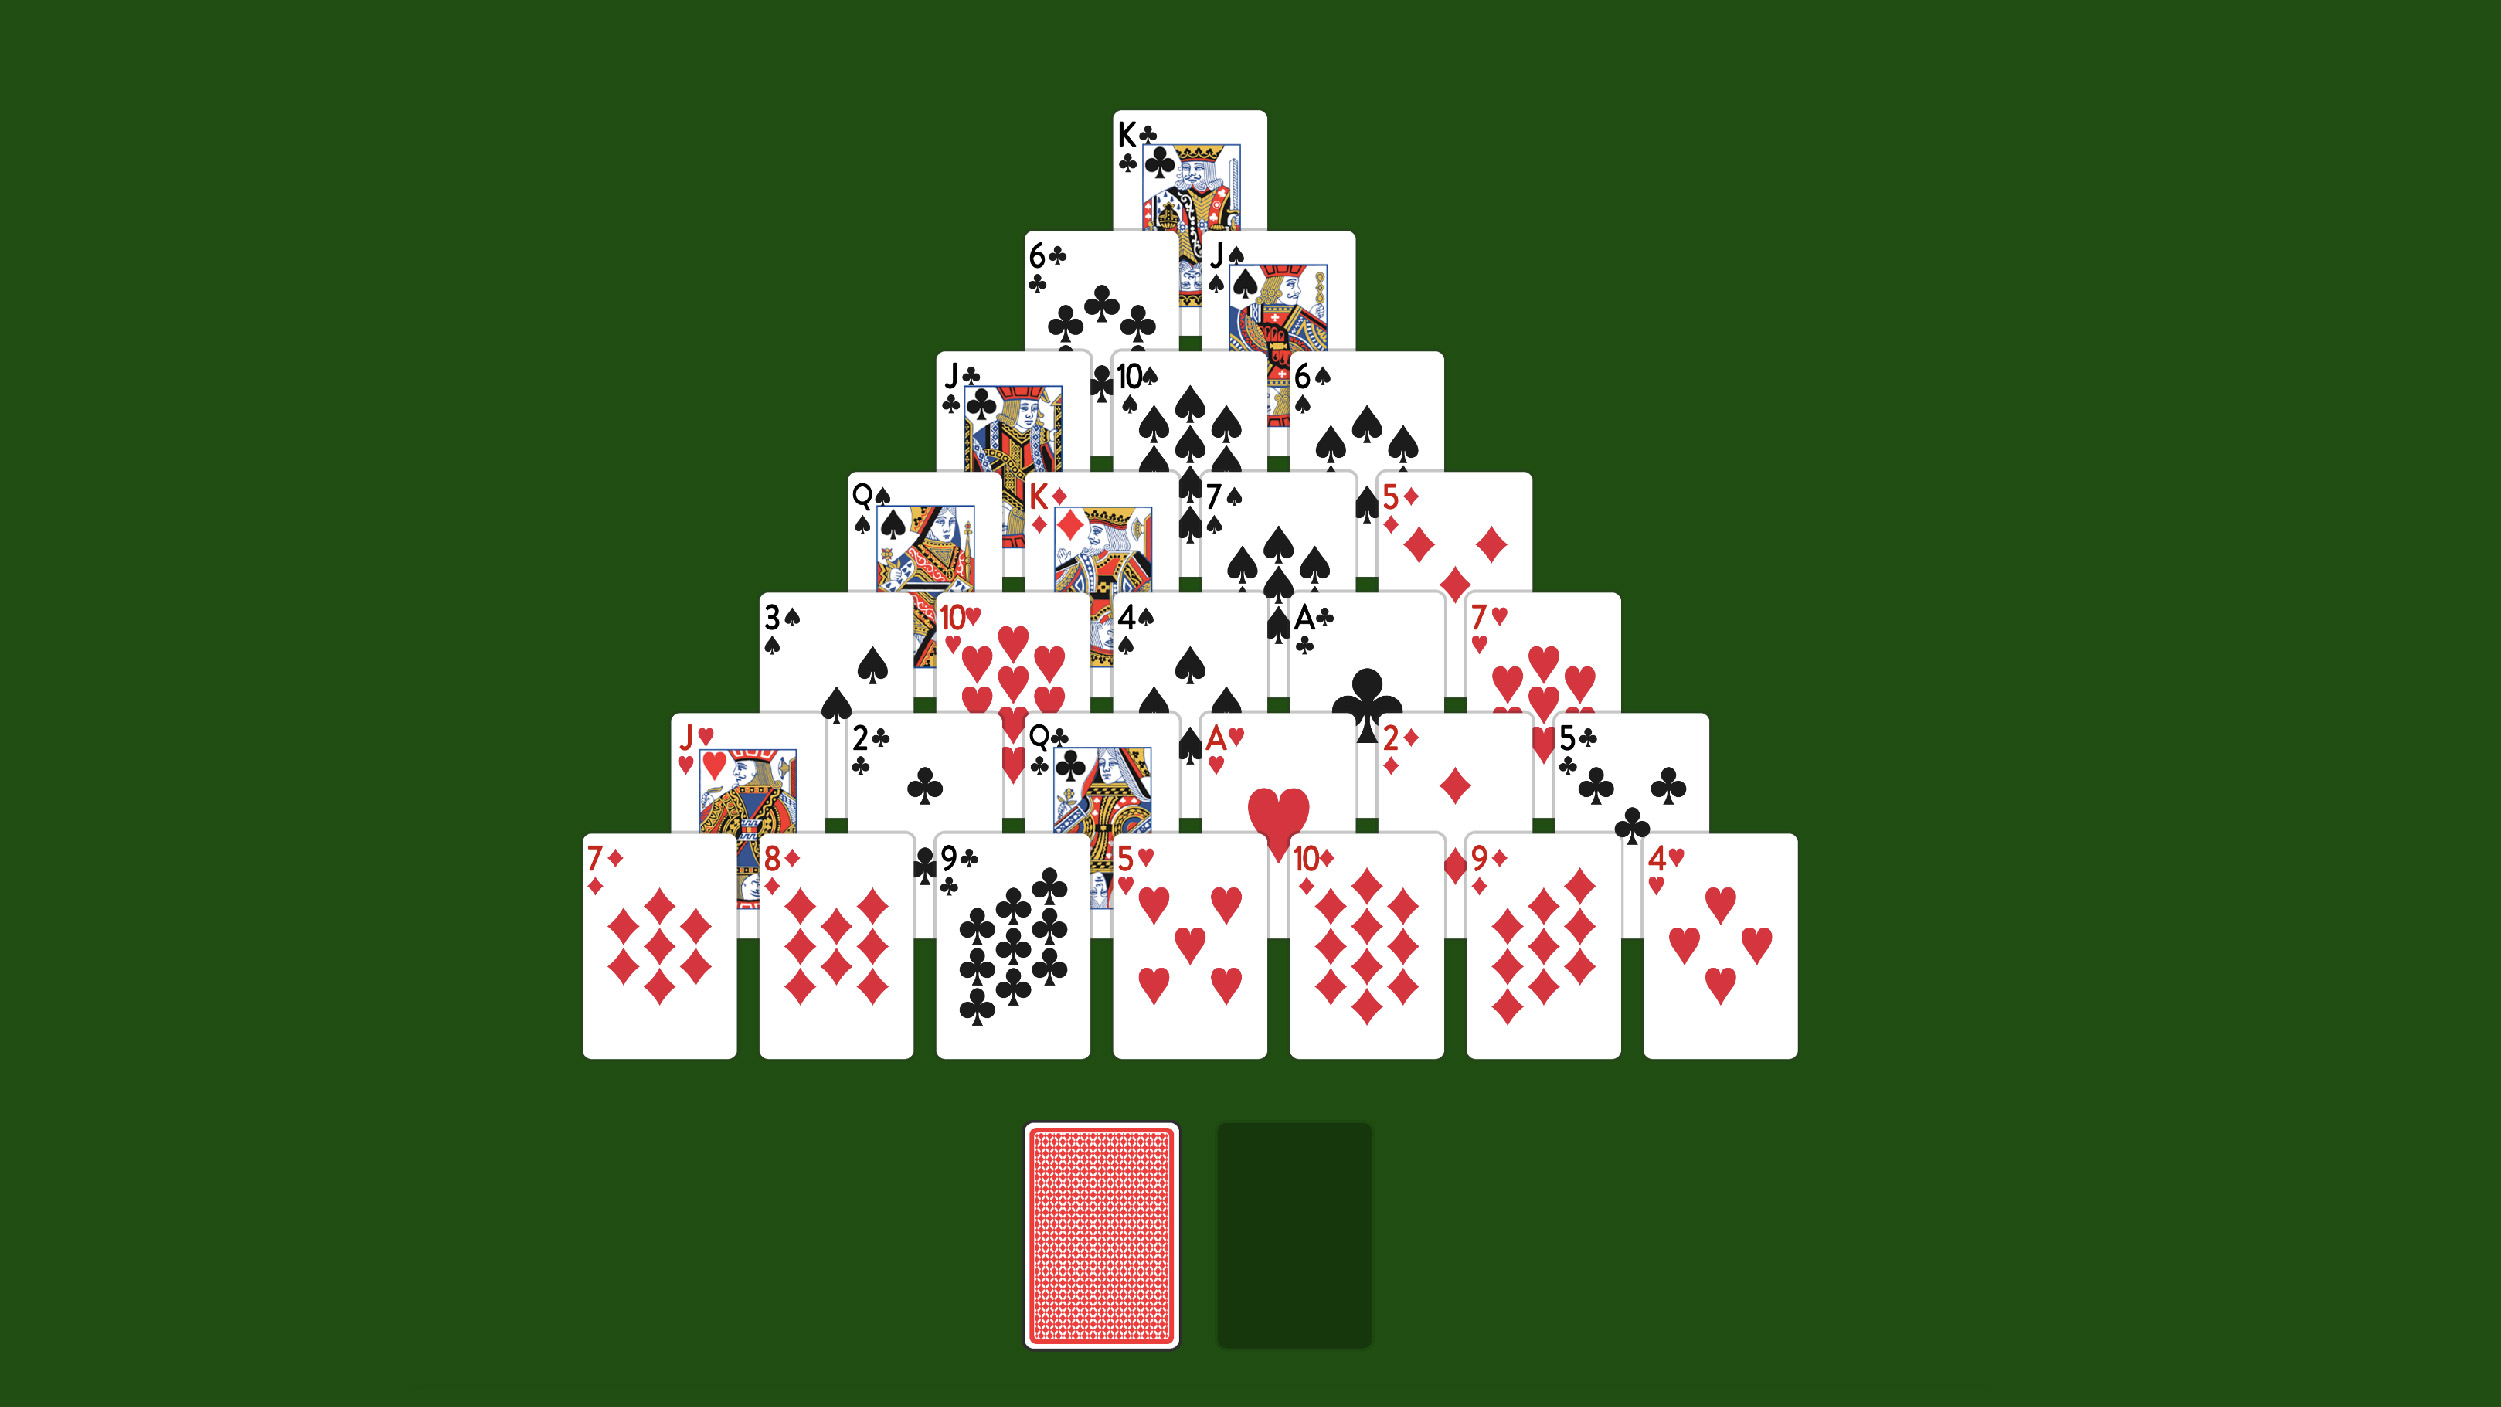 All About Spider Solitaire 2-Suit: Setup, How to Play & Win - MPL Blog